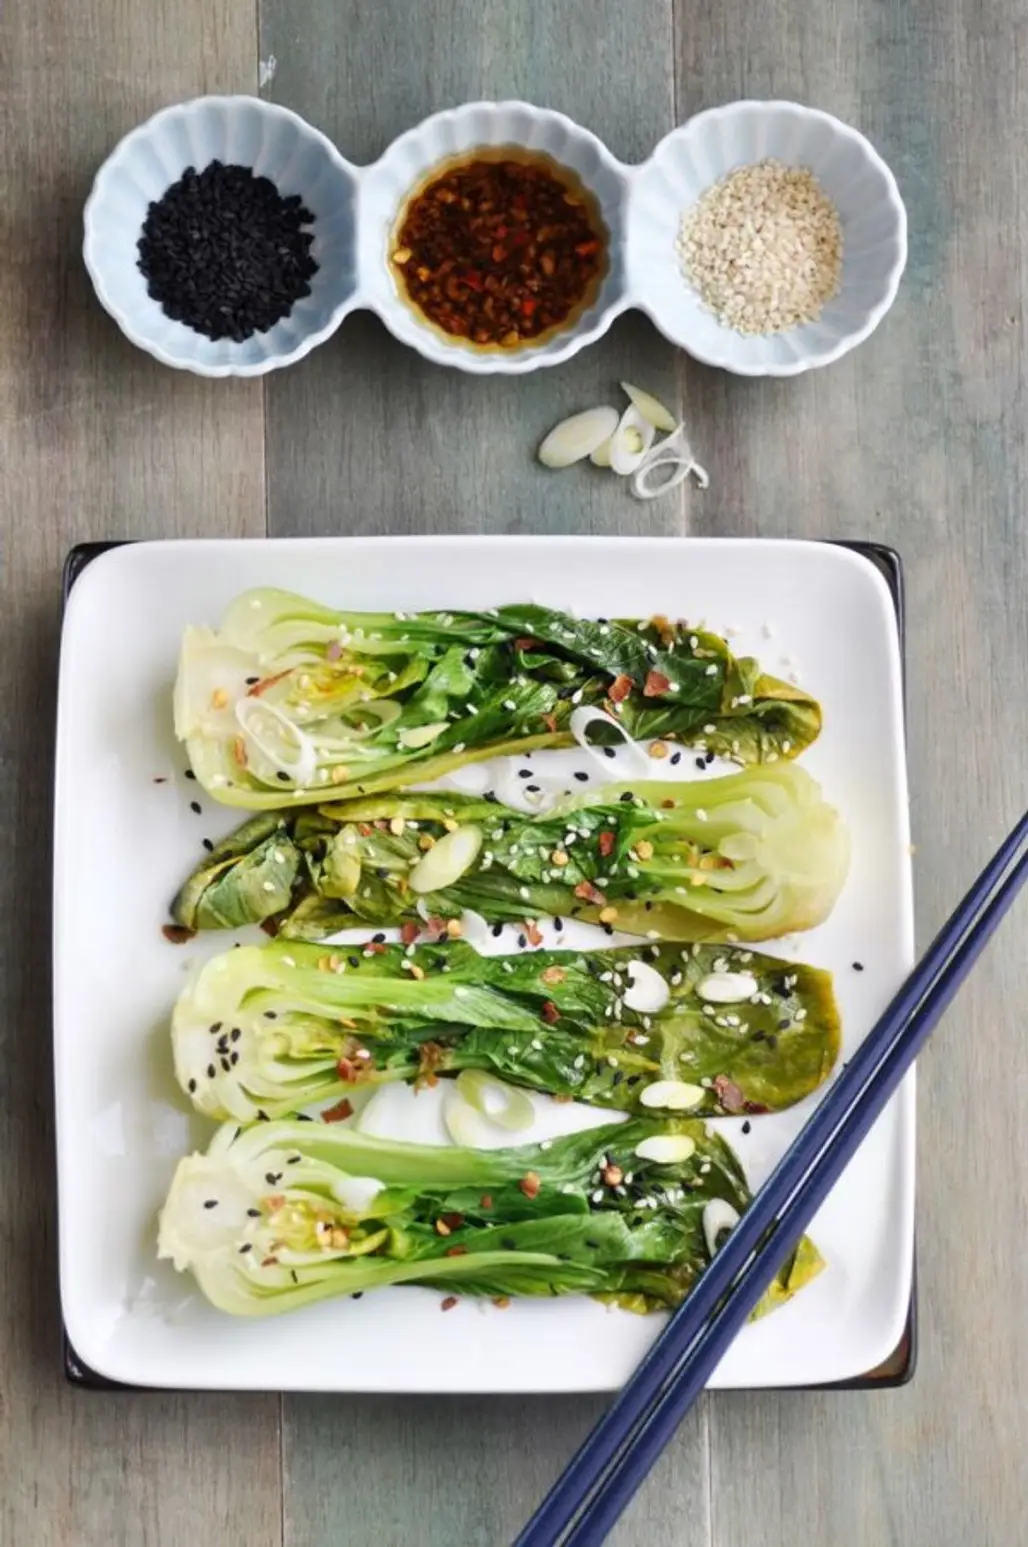 Bok Choy is Going to Be Your New Favorite